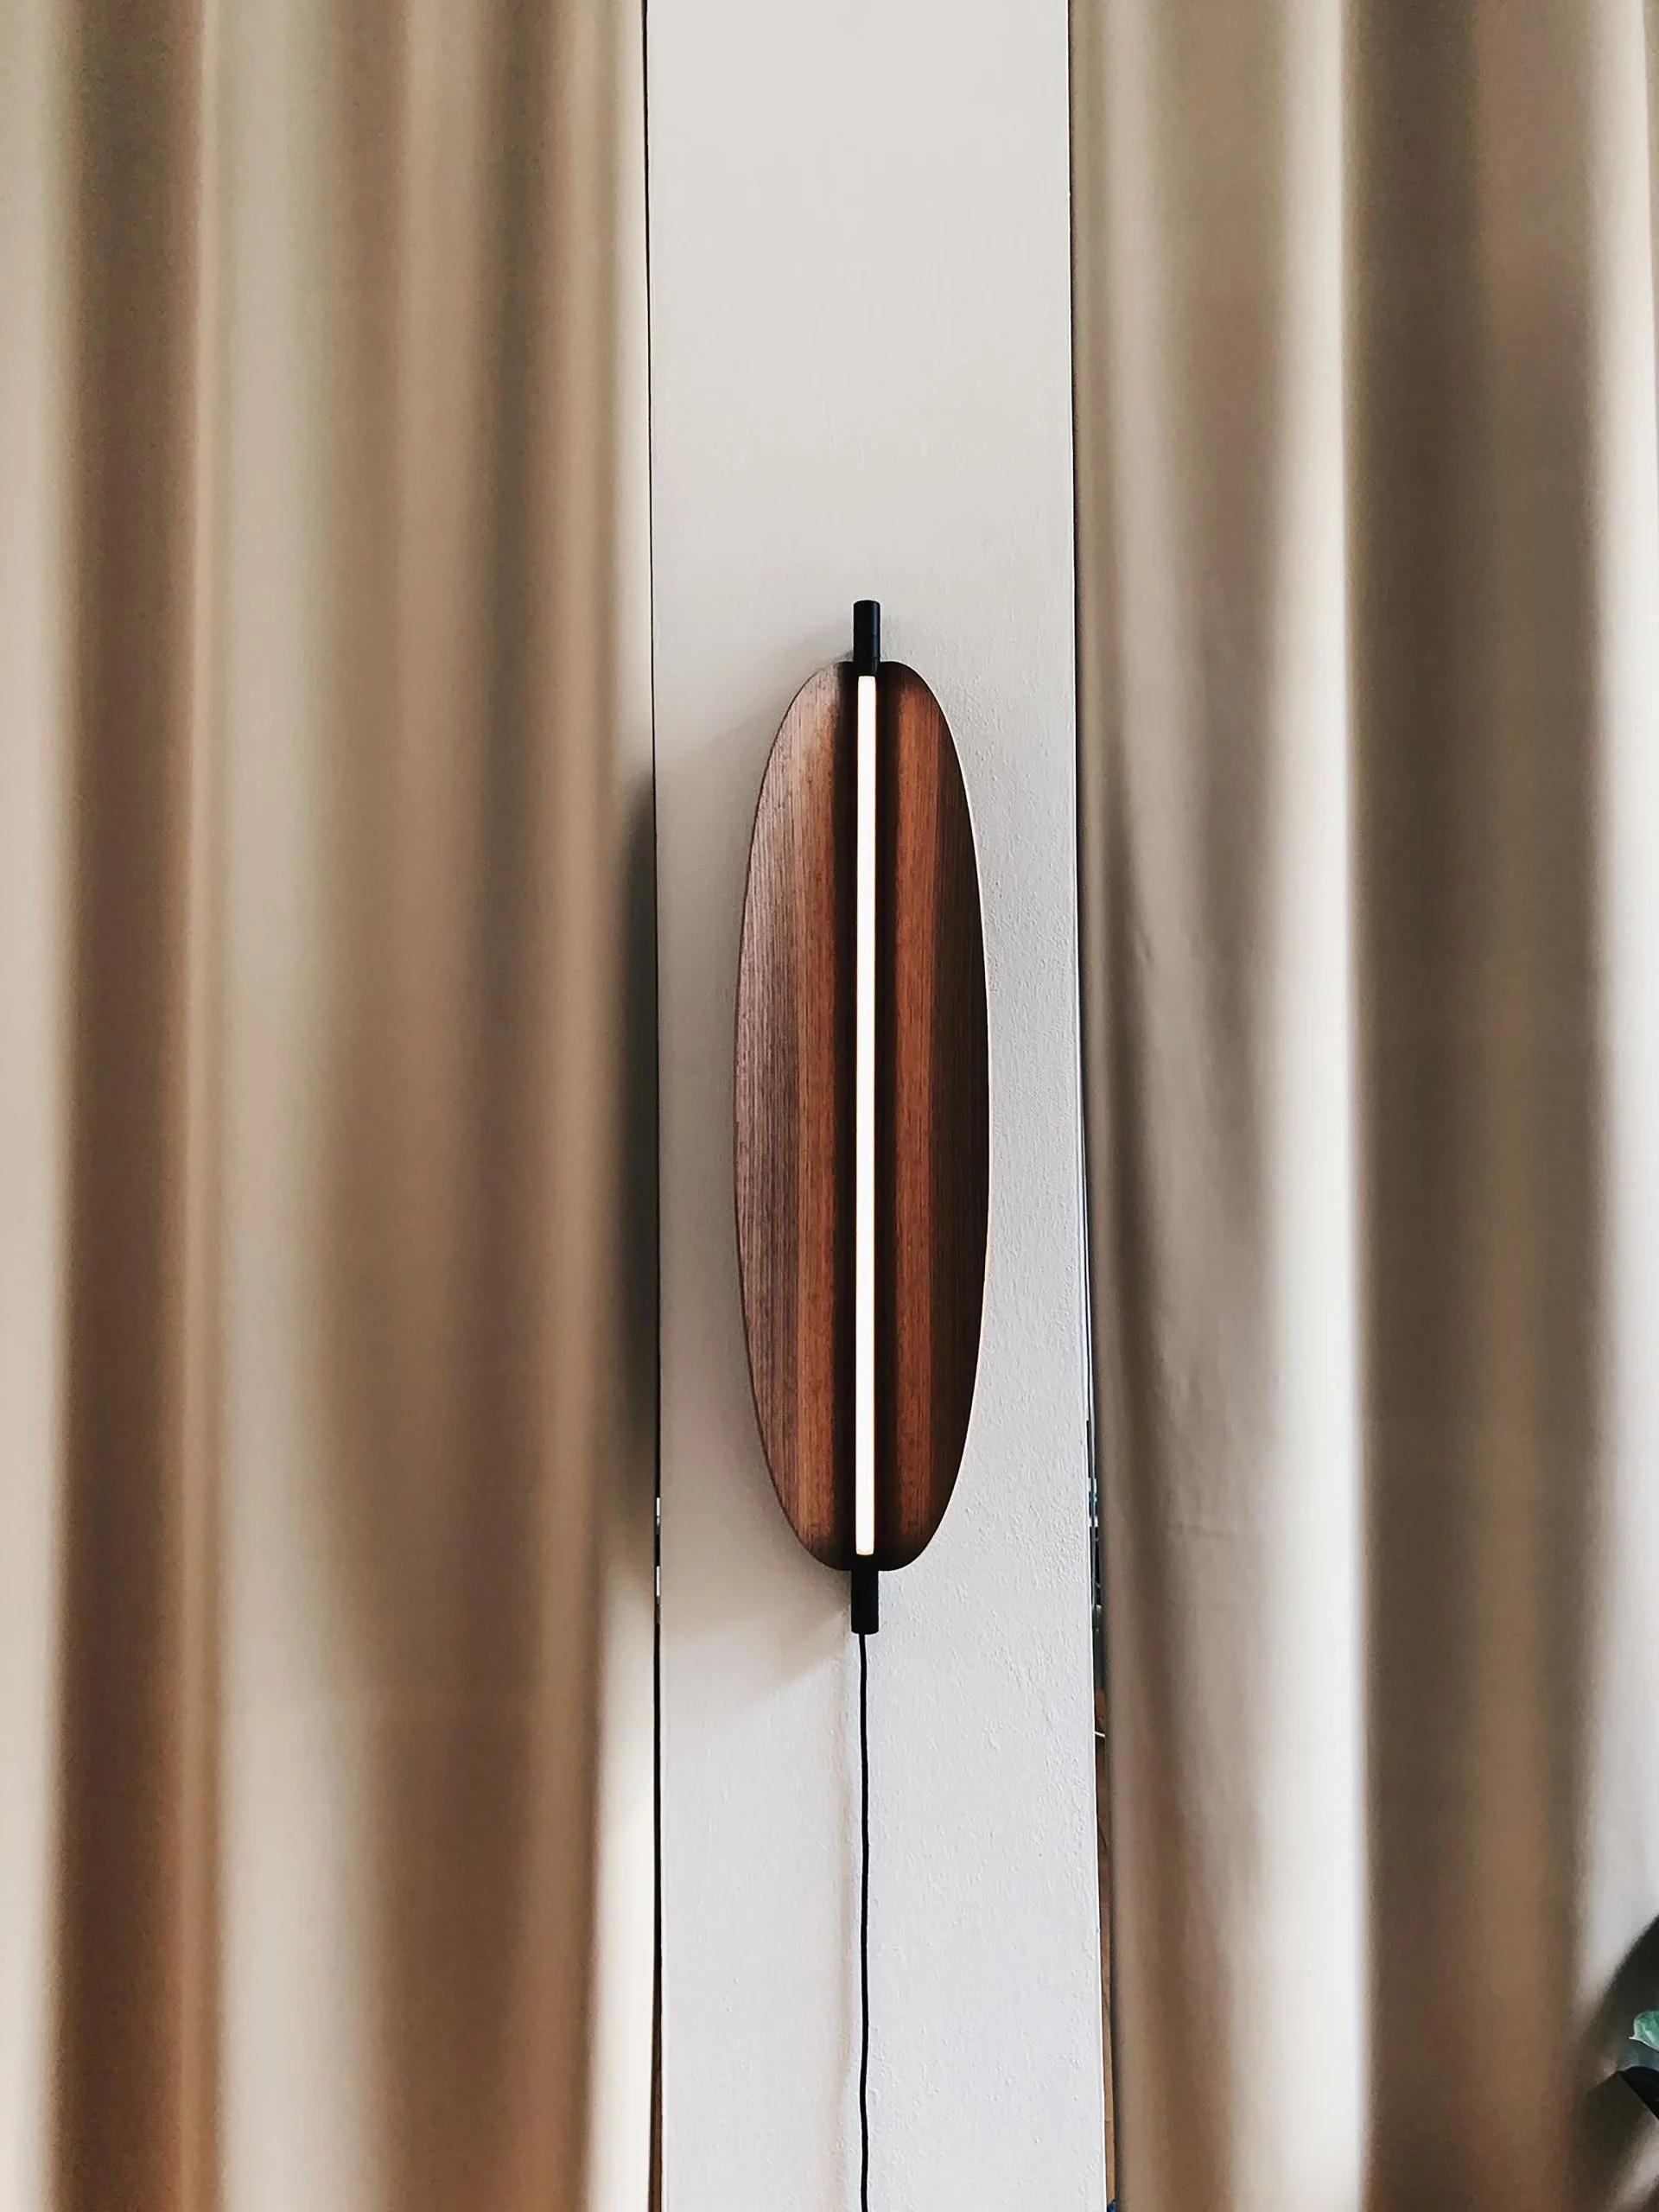 Metal Contemporary Wall Lamp 'Thula 562.43' by Federica Biasi x Tooy, Black + Walnut For Sale